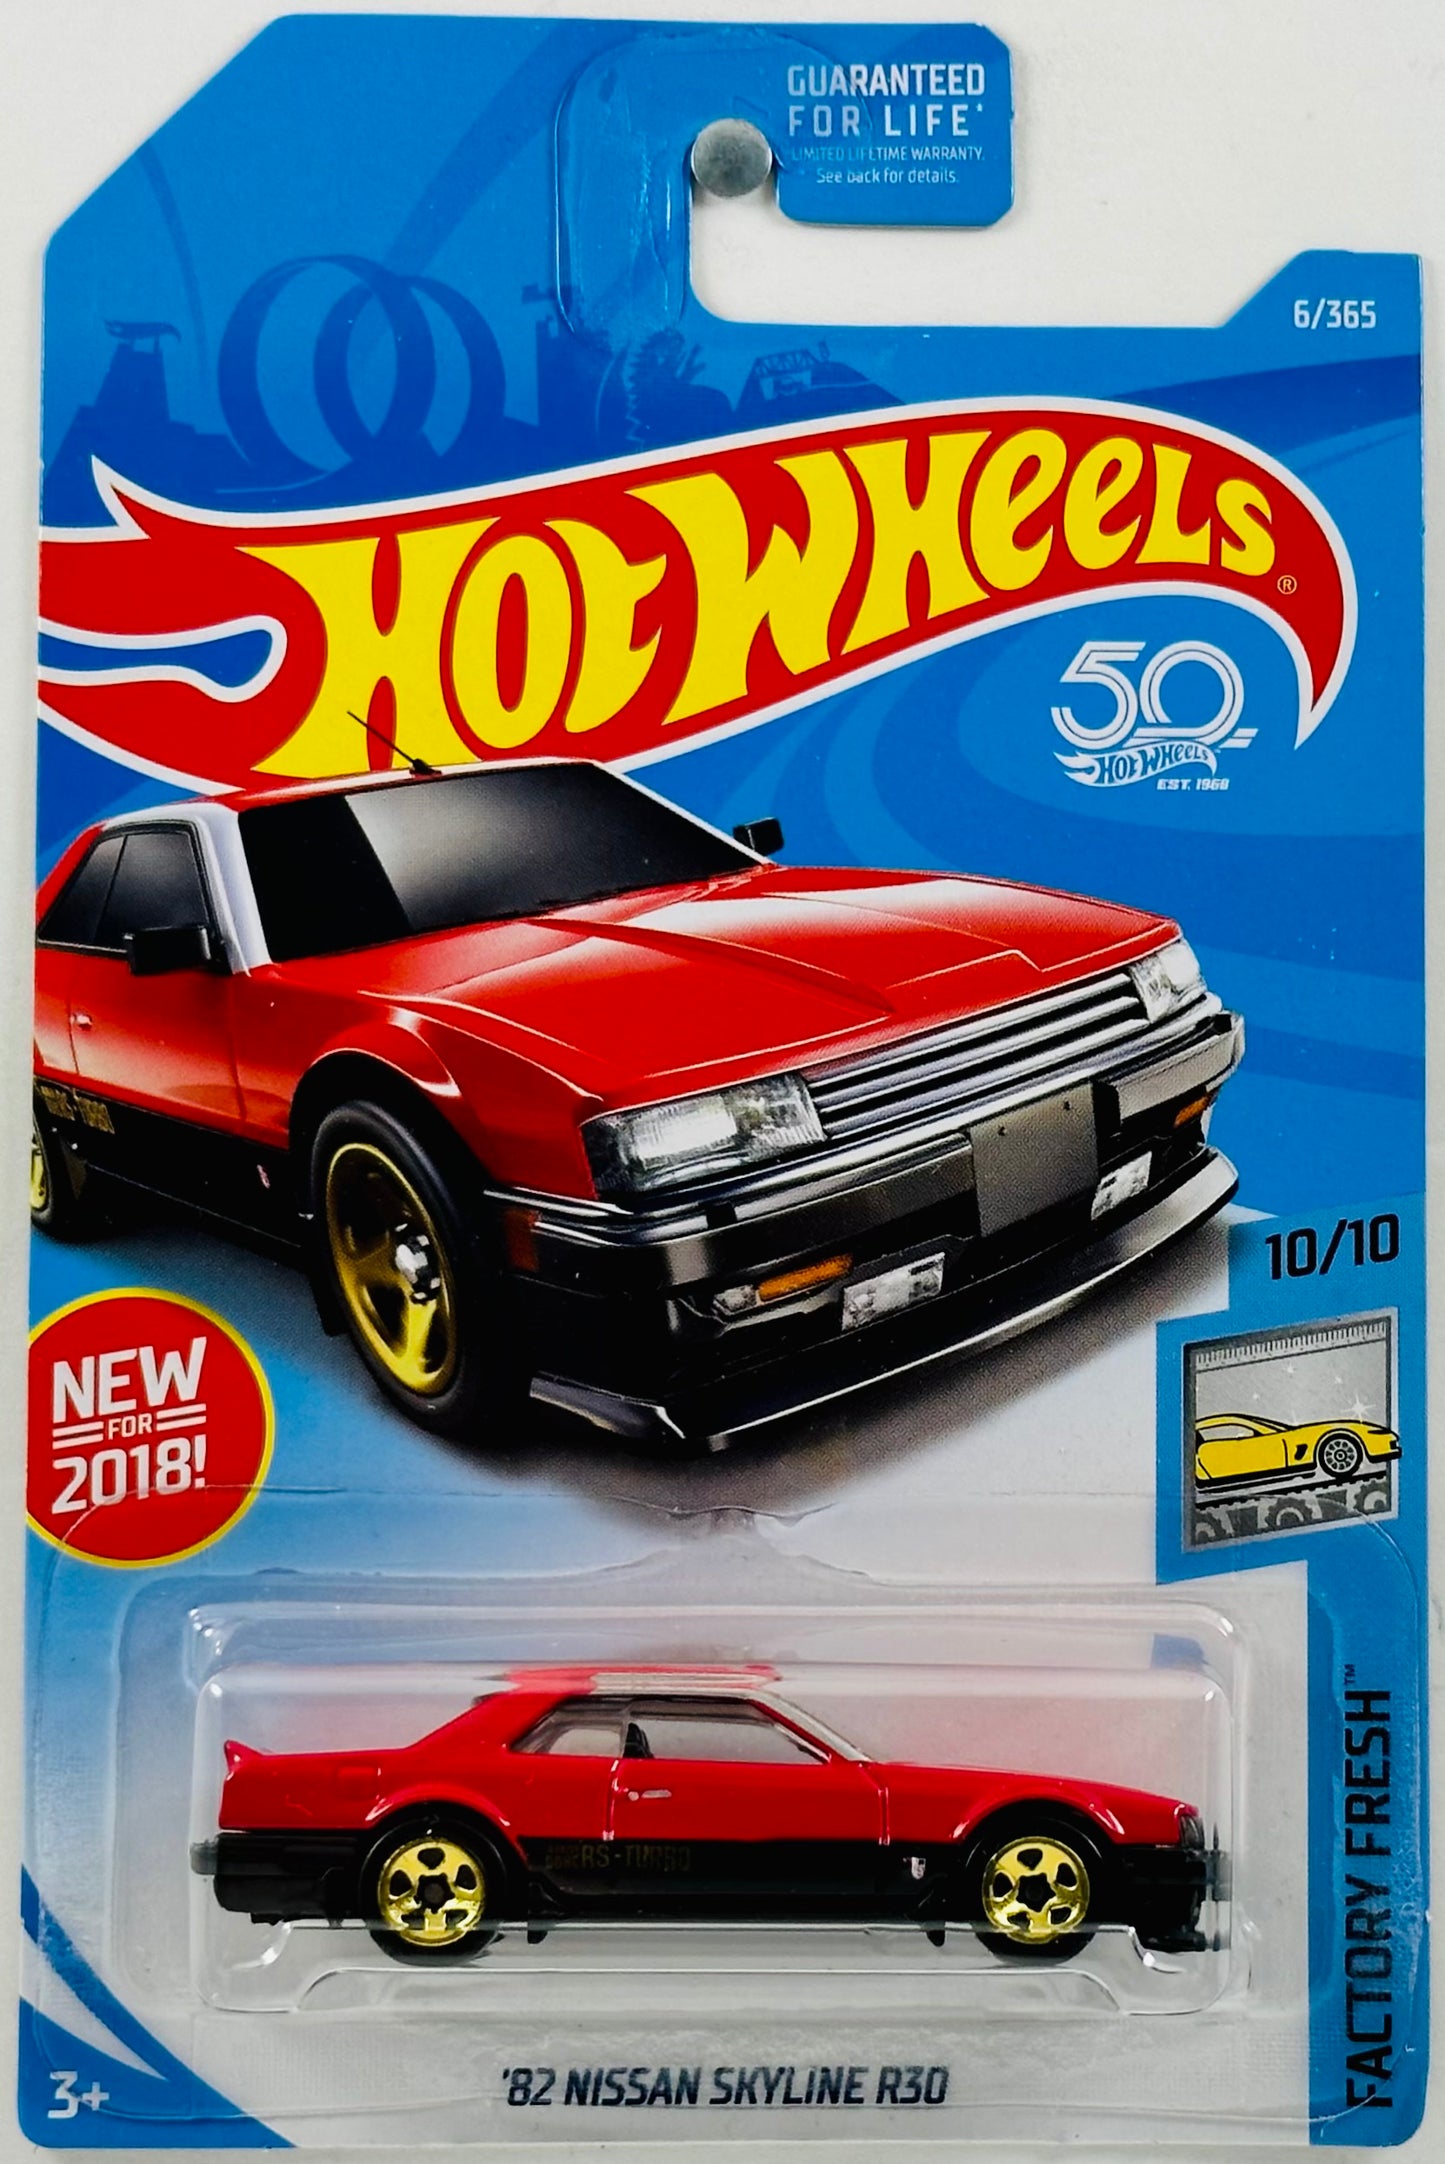 Hot Wheels 2018 - Collector # 006/365 - Factory Fresh 10/10 - New Models - '82 Nissan Skyline R30 - Red - USA